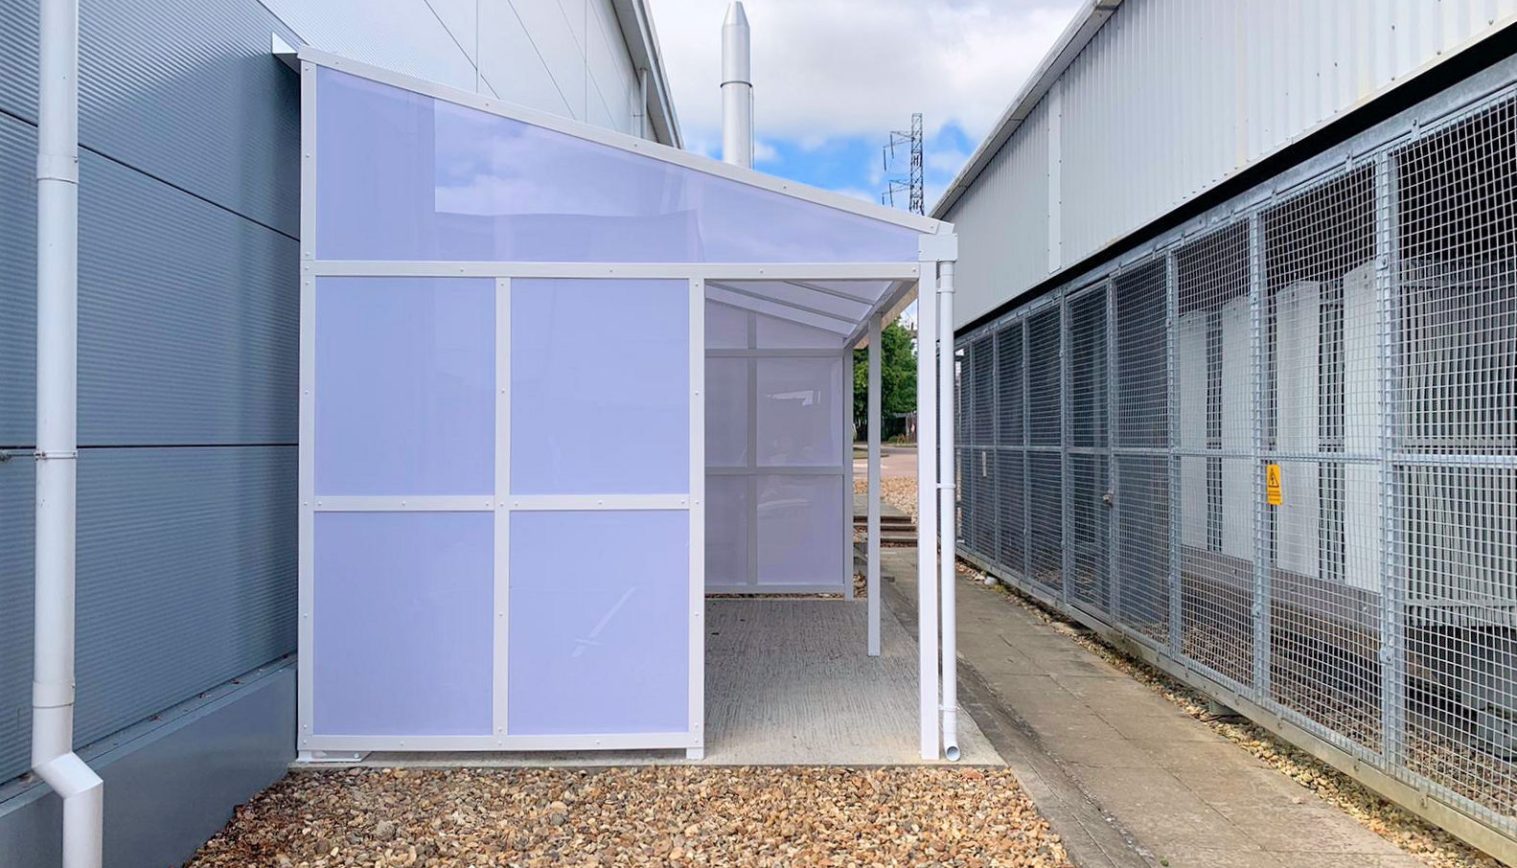 Culham Science Centre – Wall Mounted Canopy